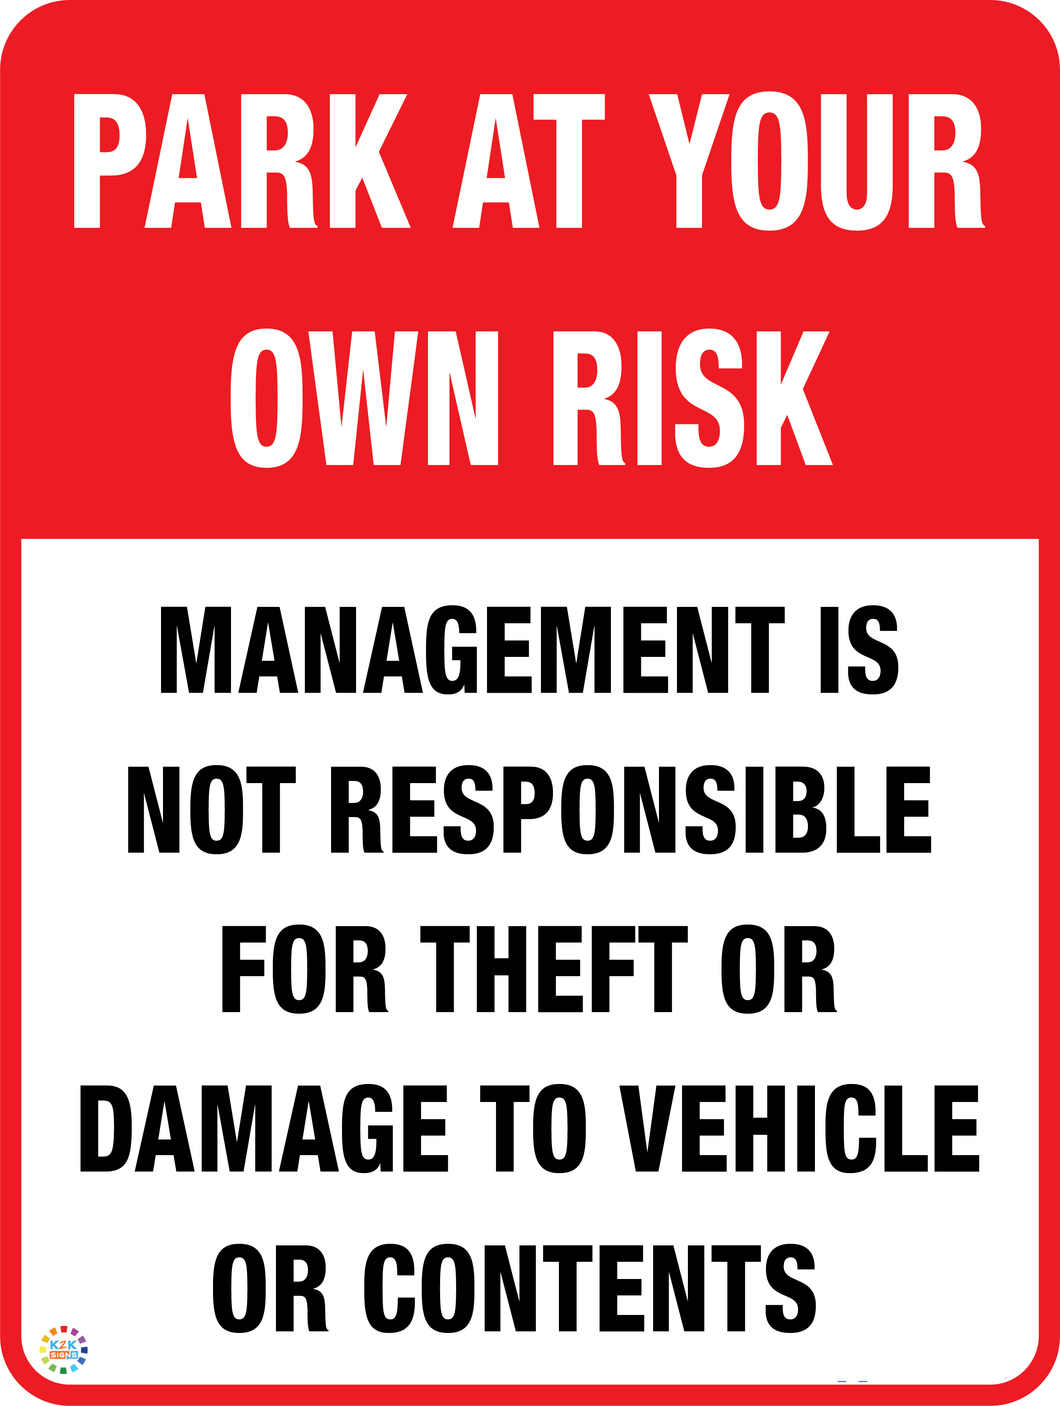 Park At Your Own Risk - Management is not responsible for theft or damage to vehicle or contents sign